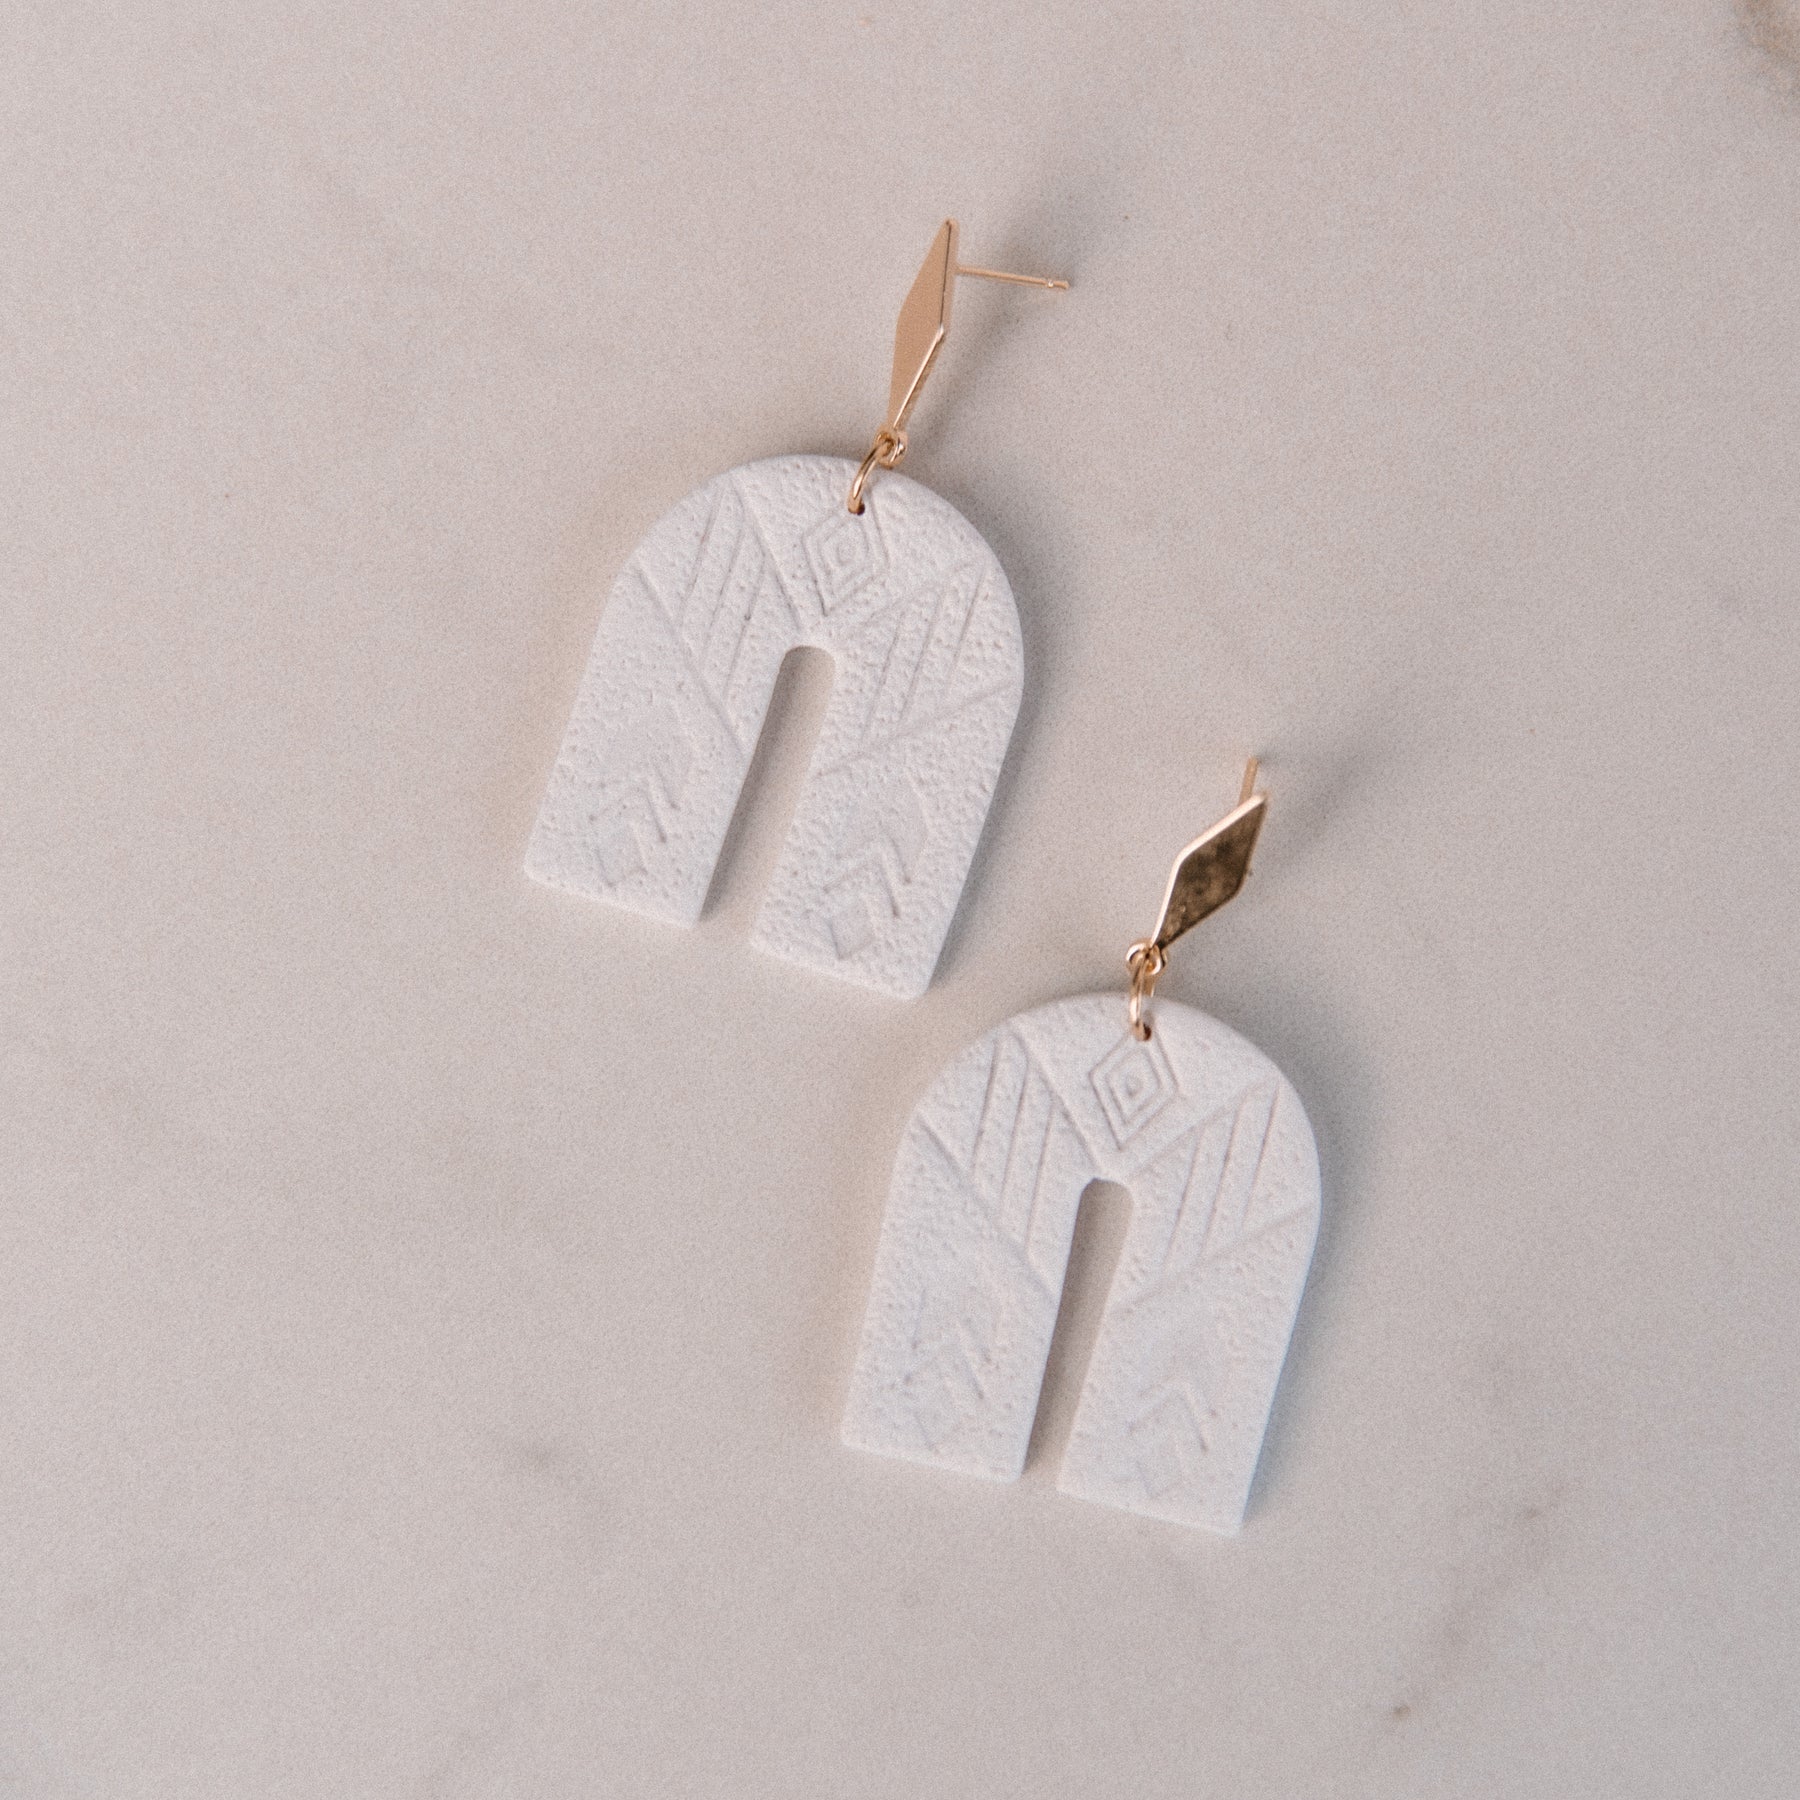 Arched Aztec Dangle Earrings